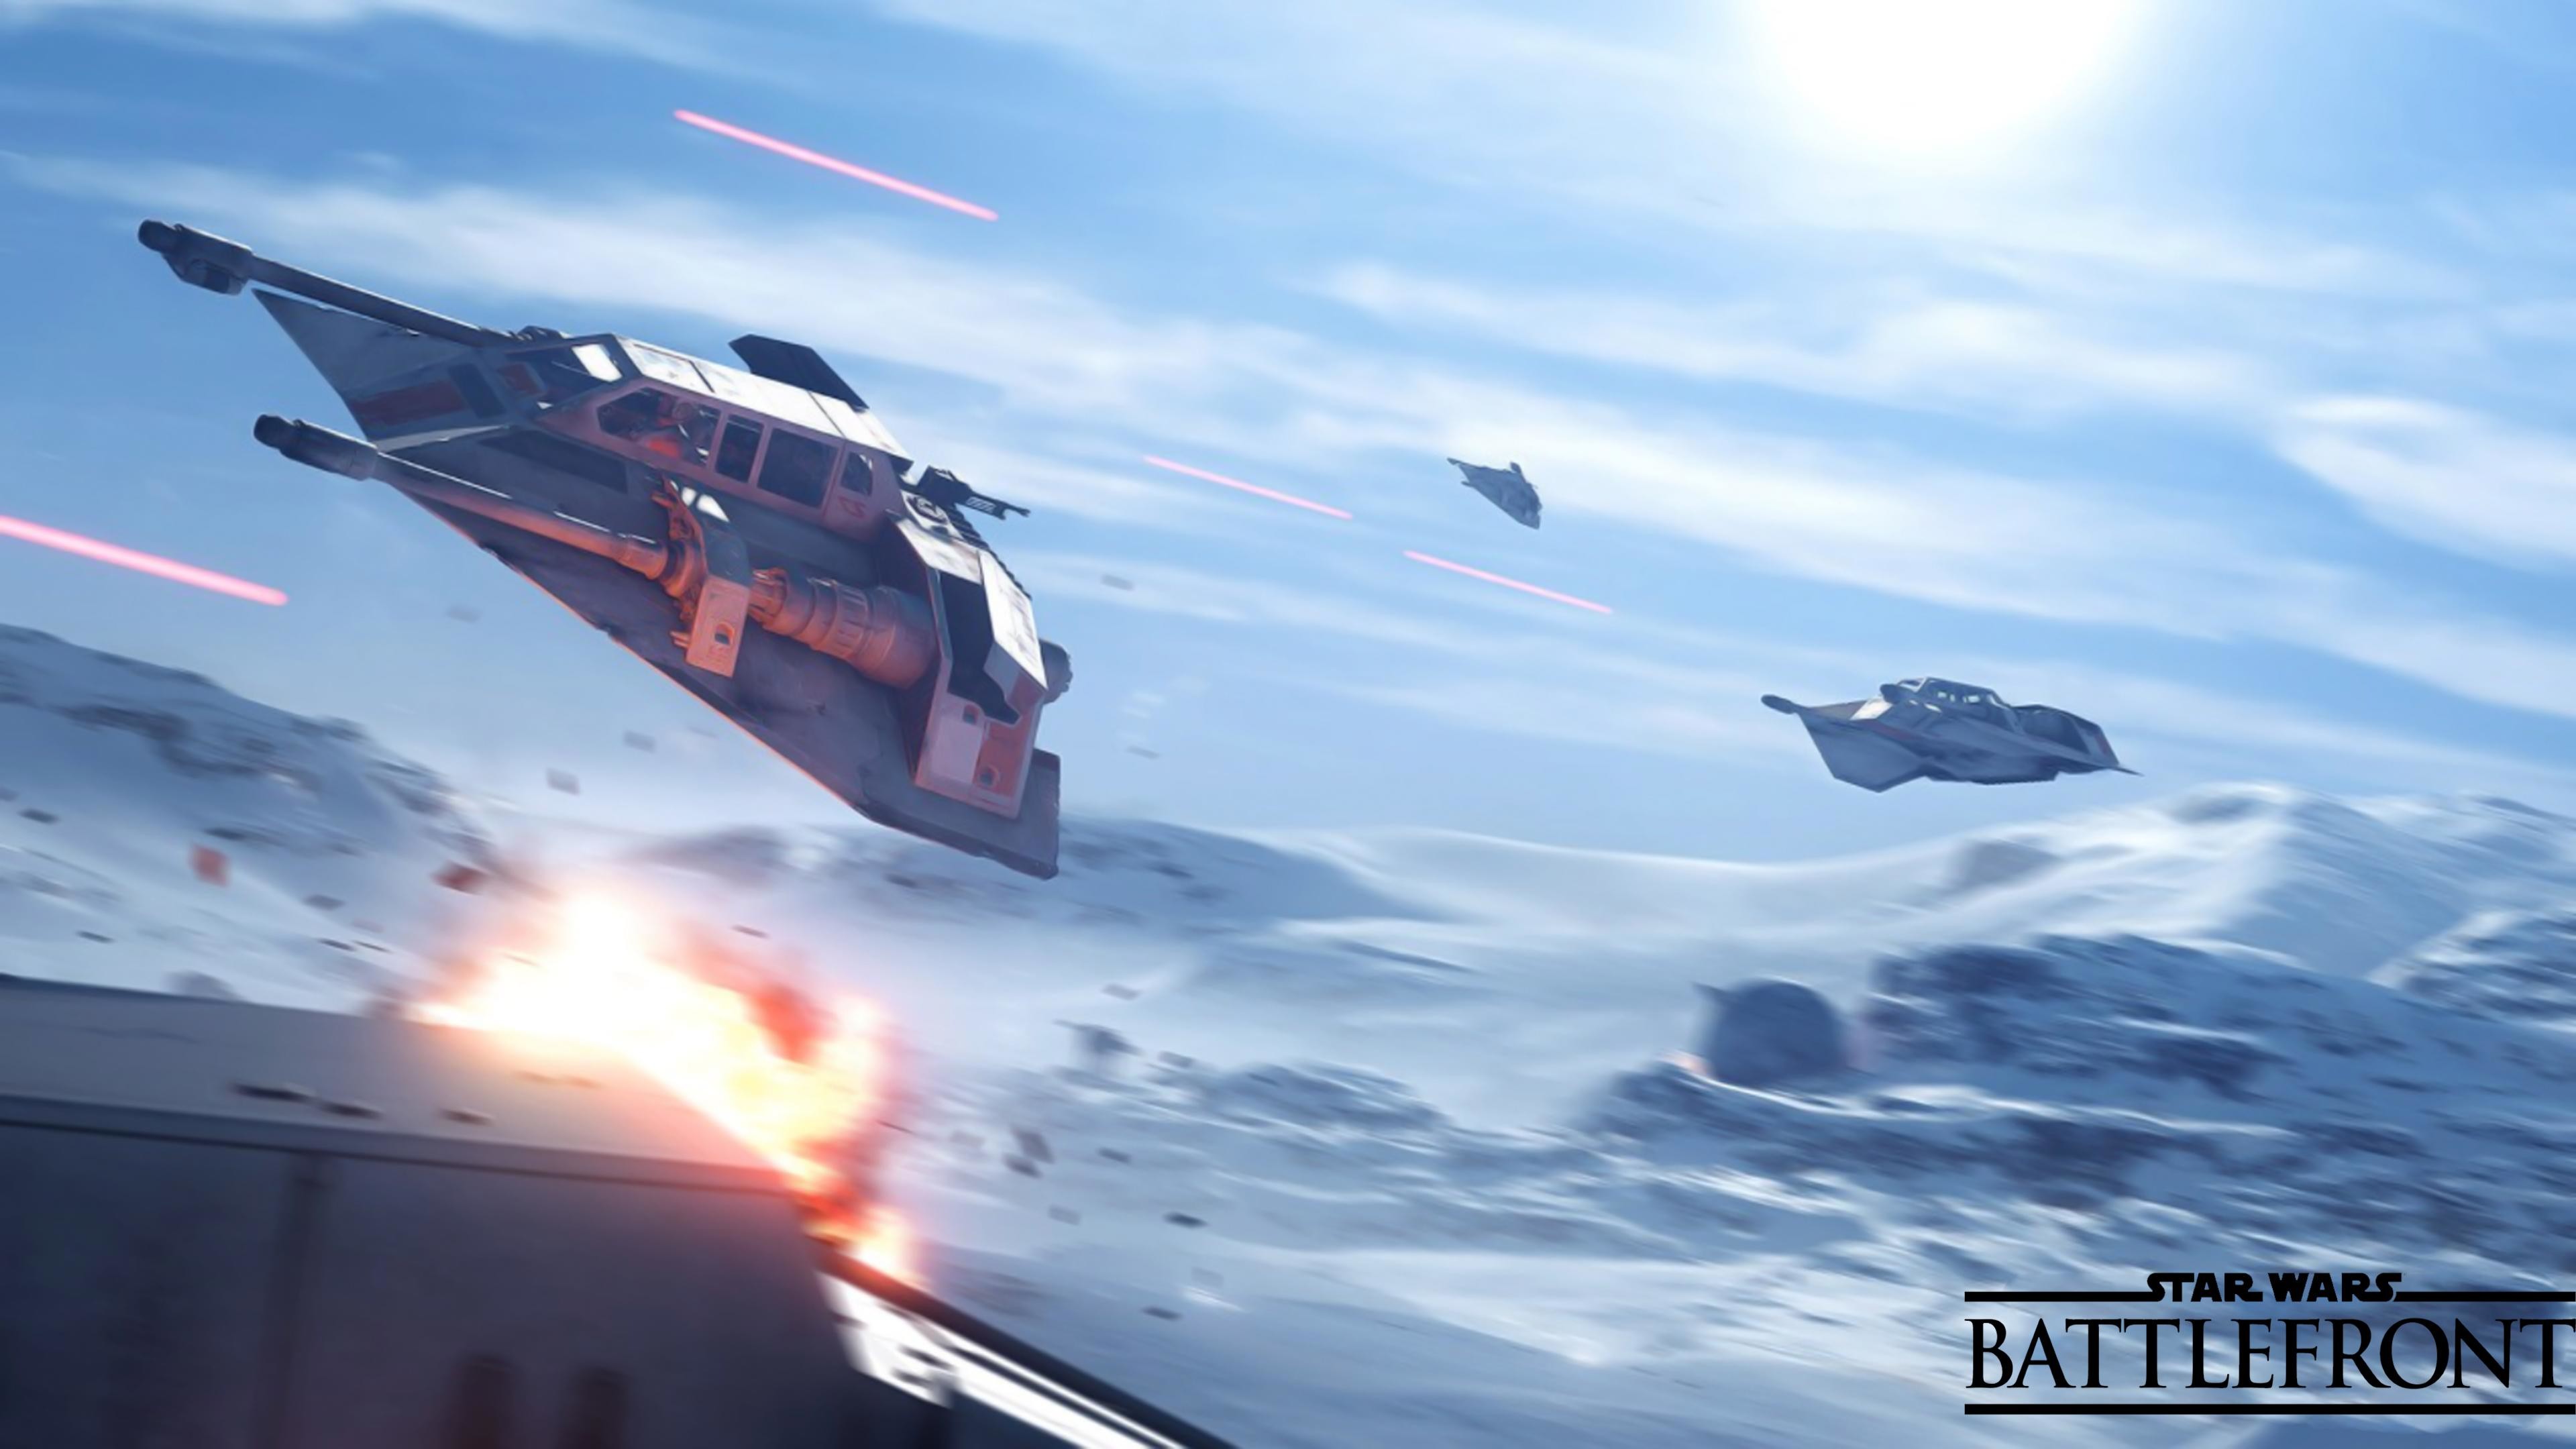 I made another 4K Star Wars Battlefront wallpaper for you guys!